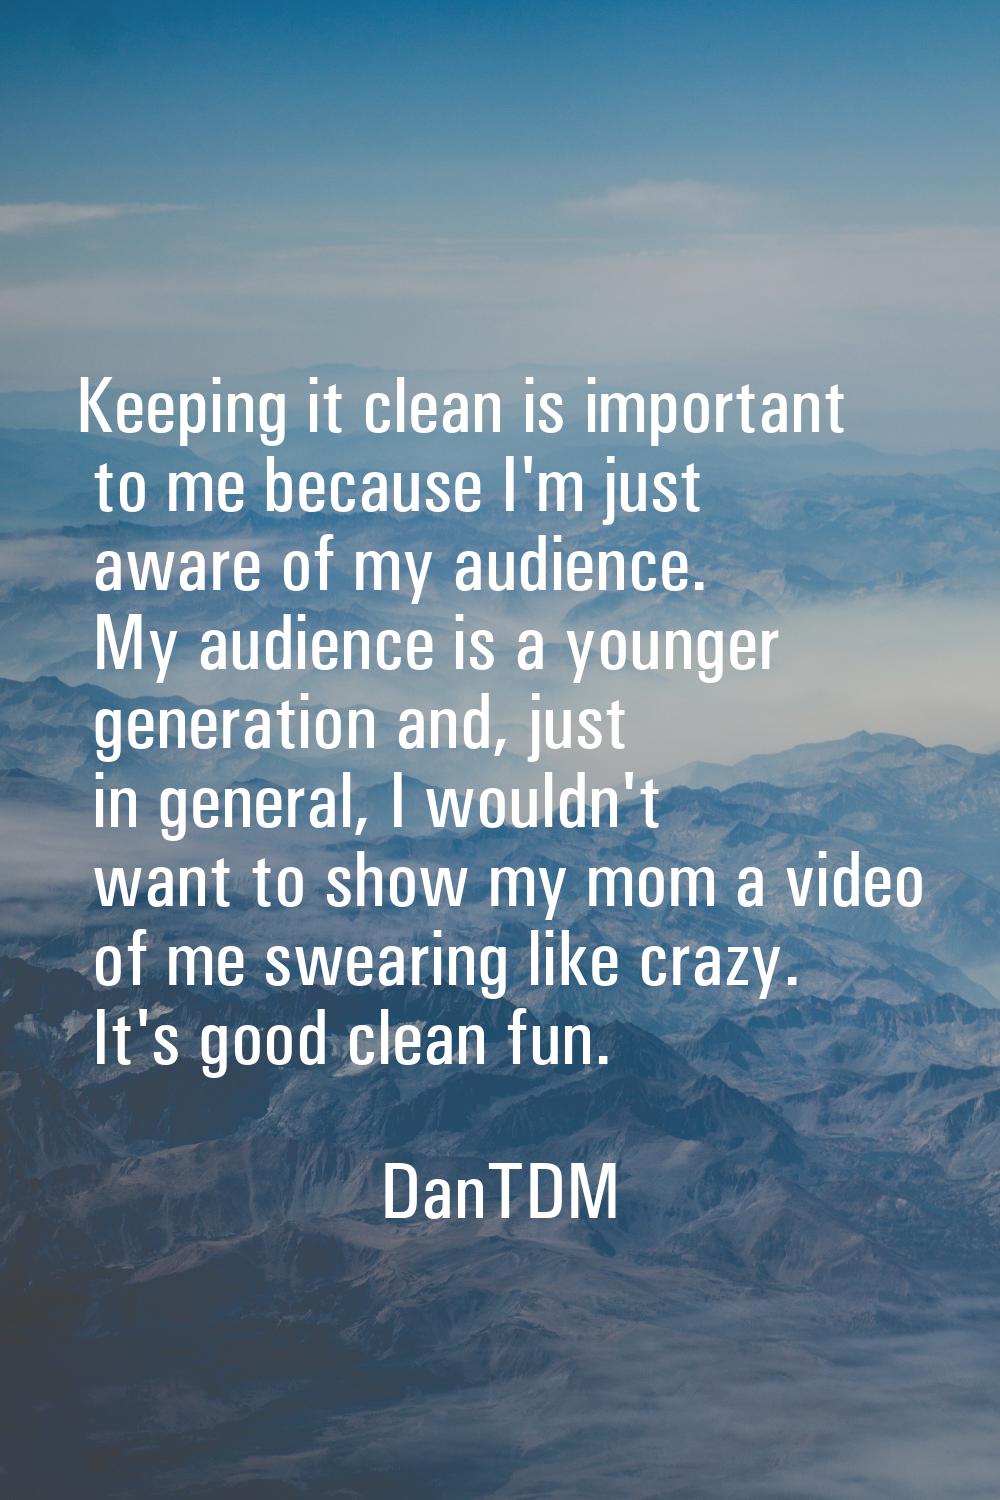 Keeping it clean is important to me because I'm just aware of my audience. My audience is a younger